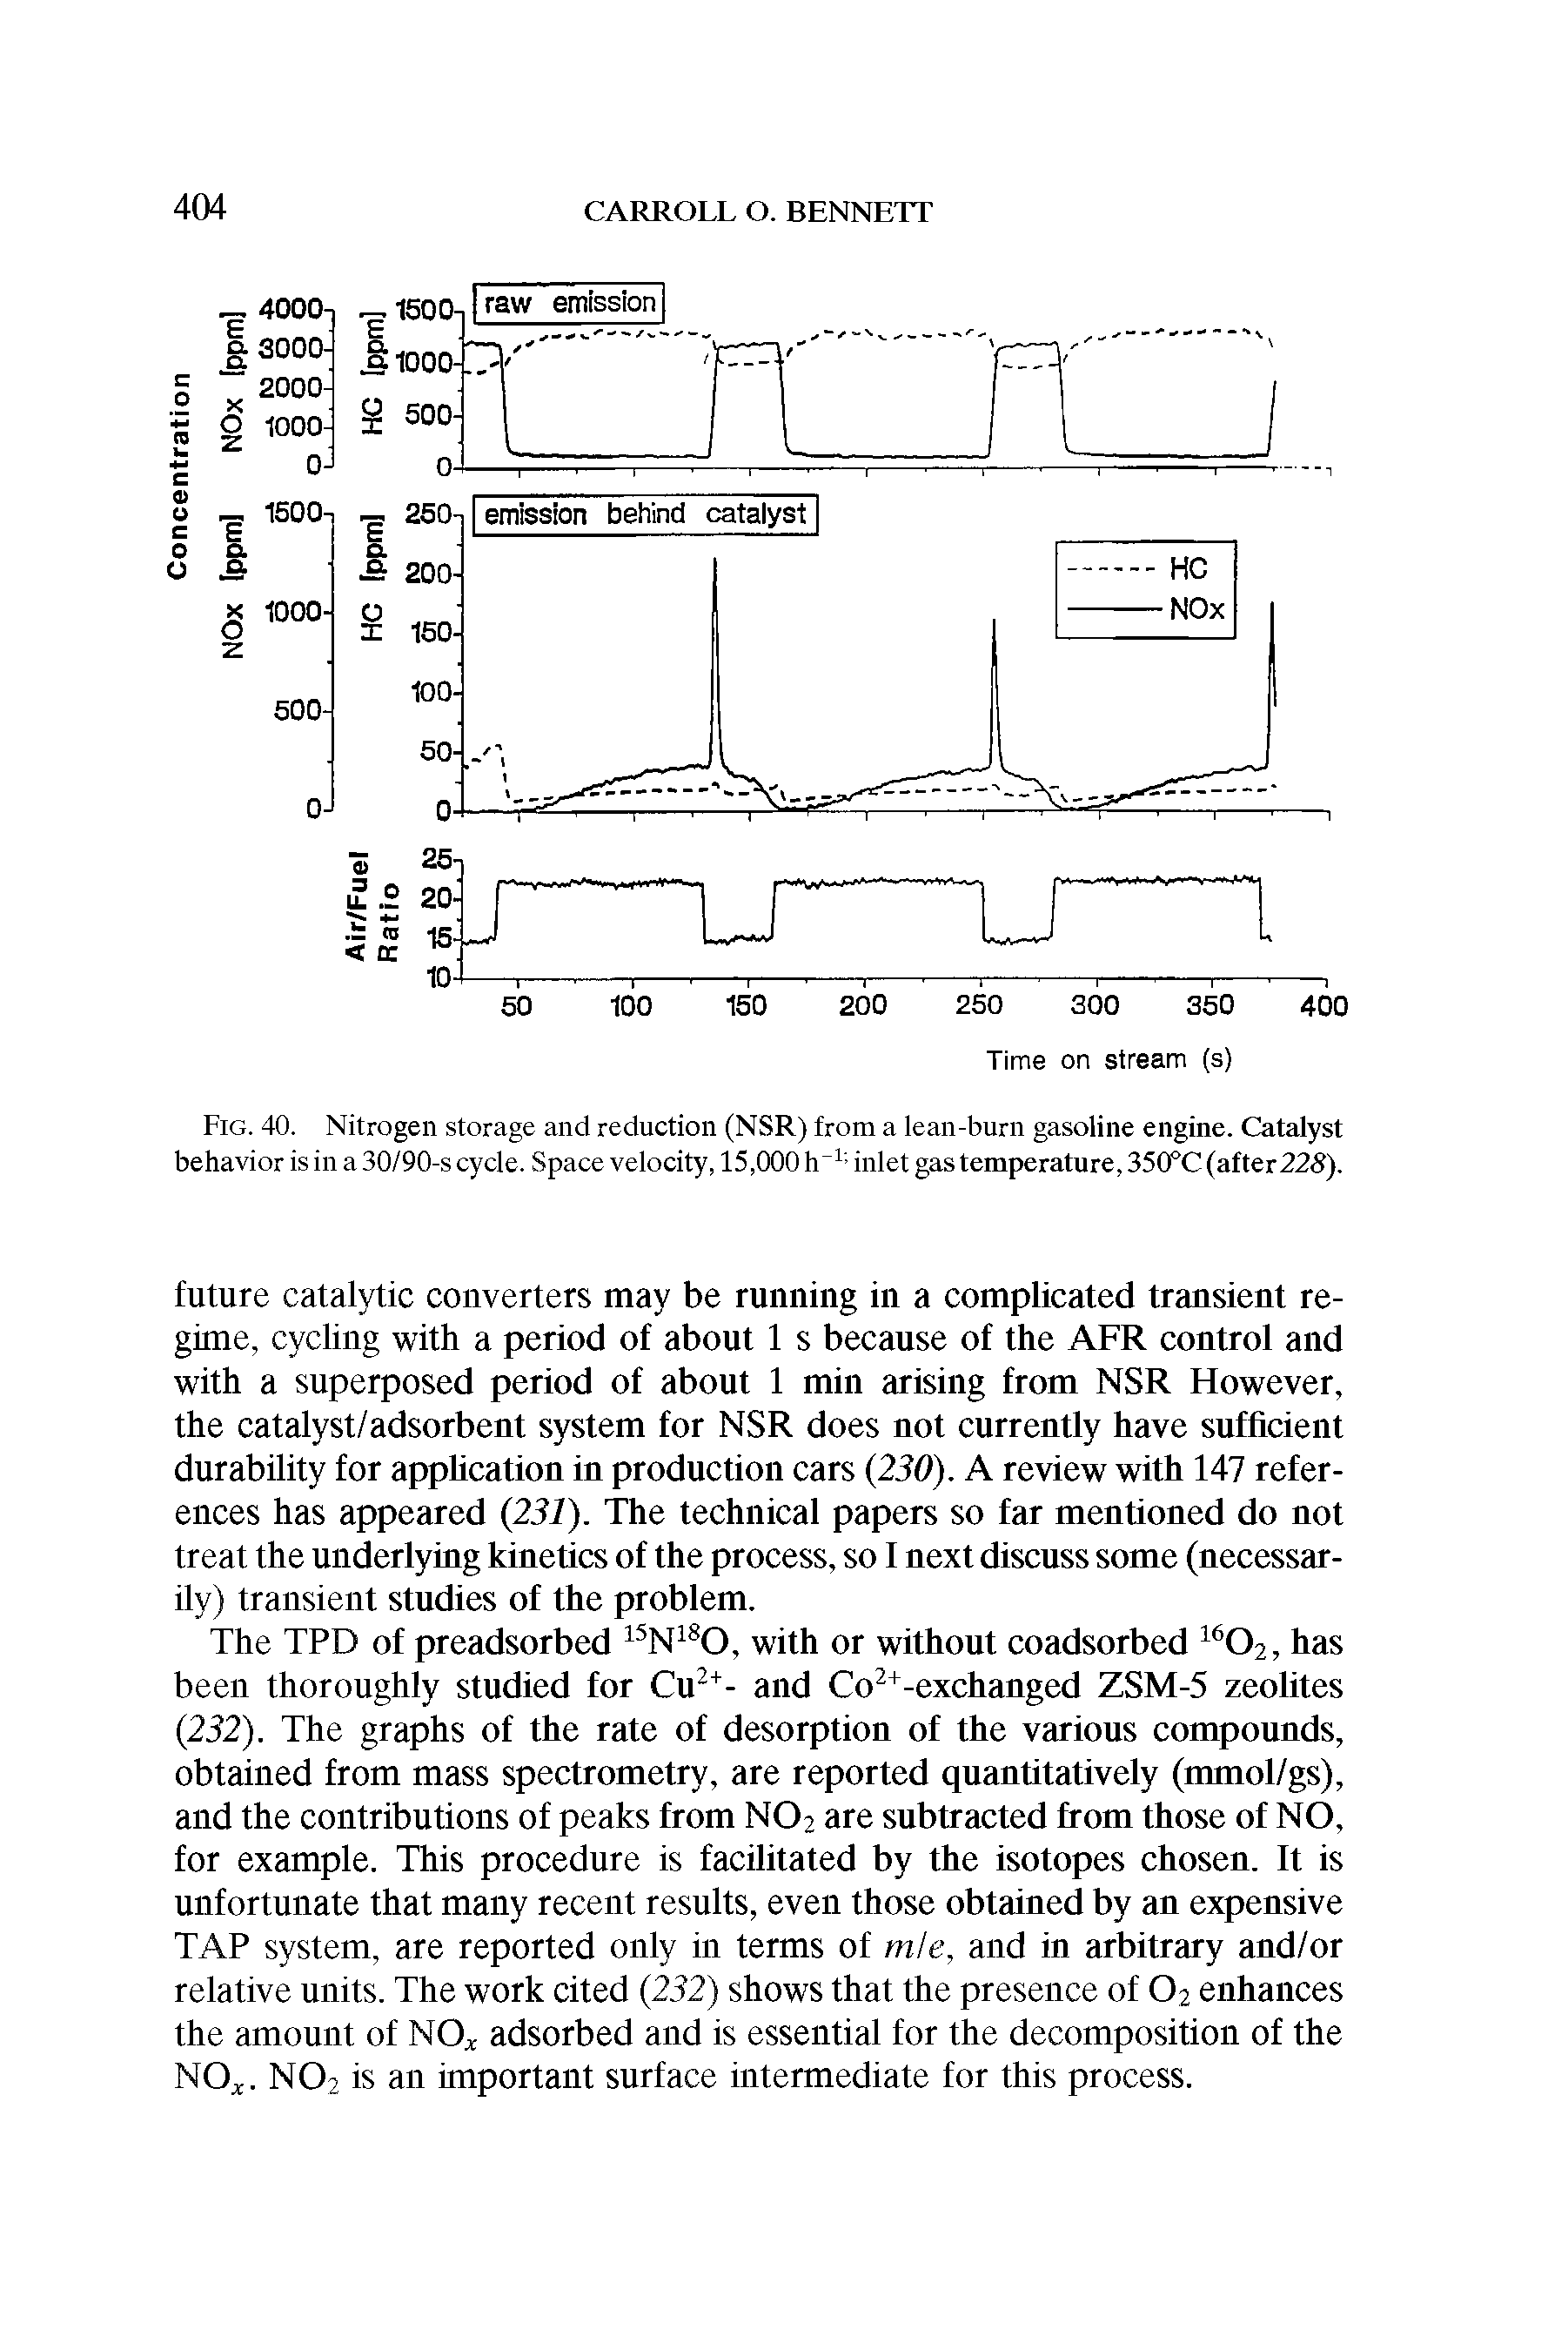 Fig. 40. Nitrogen storage and reduction (NSR) from a lean-burn gasoline engine. Catalyst behavior is in a 30/90-s cycle. Space velocity, 15,000 inlet gas temperature, 35CfC (after225).